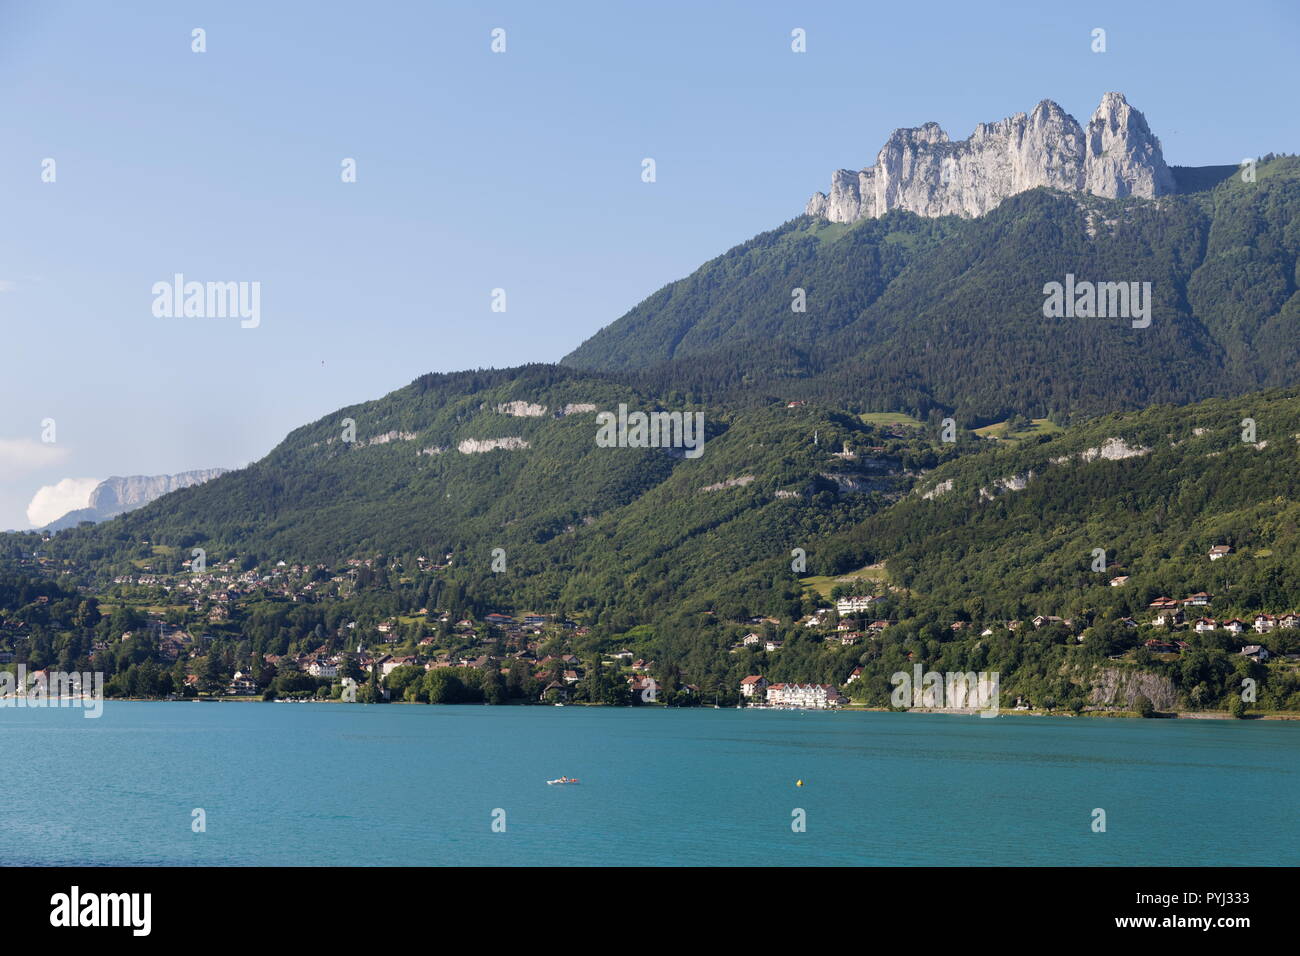 Leisure activities on Lake Annecy France Stock Photo